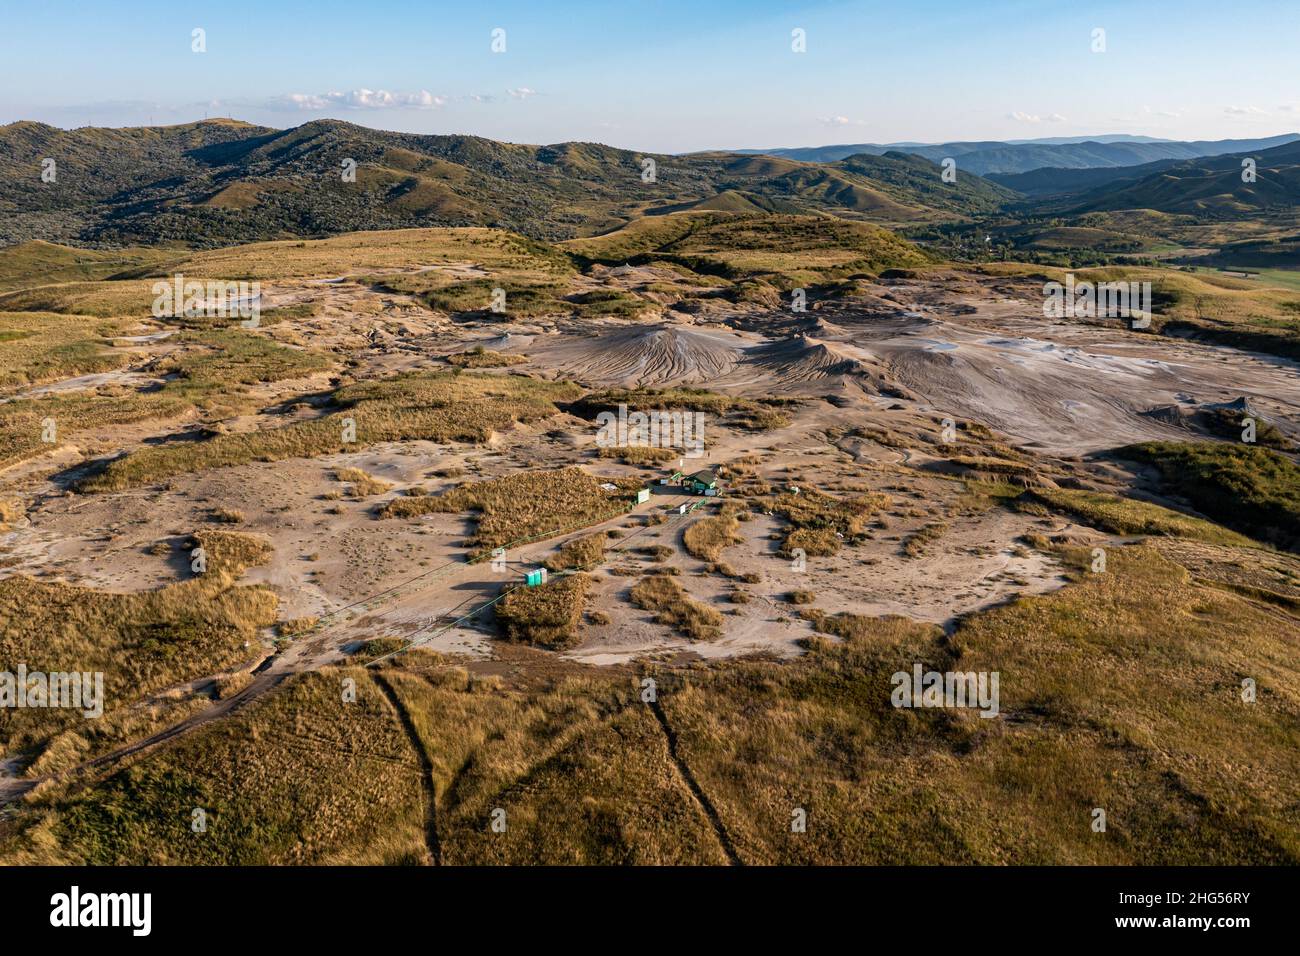 The landscape of the mud volcanoes of Berca in Romania Stock Photo